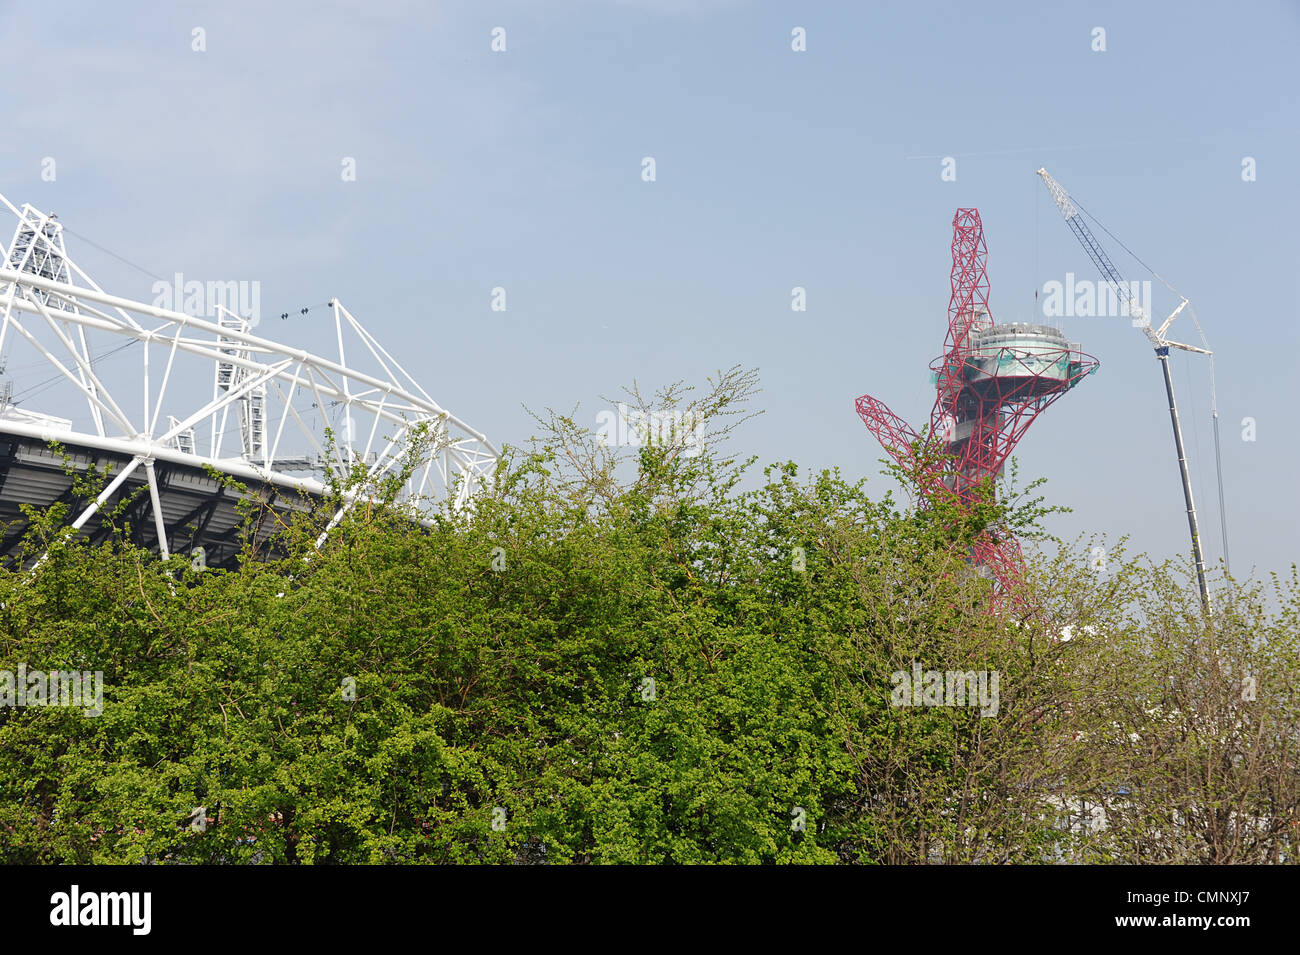 View of Olympic Stadium with ArcelorMittal Orbit Tower in the background. Stock Photo